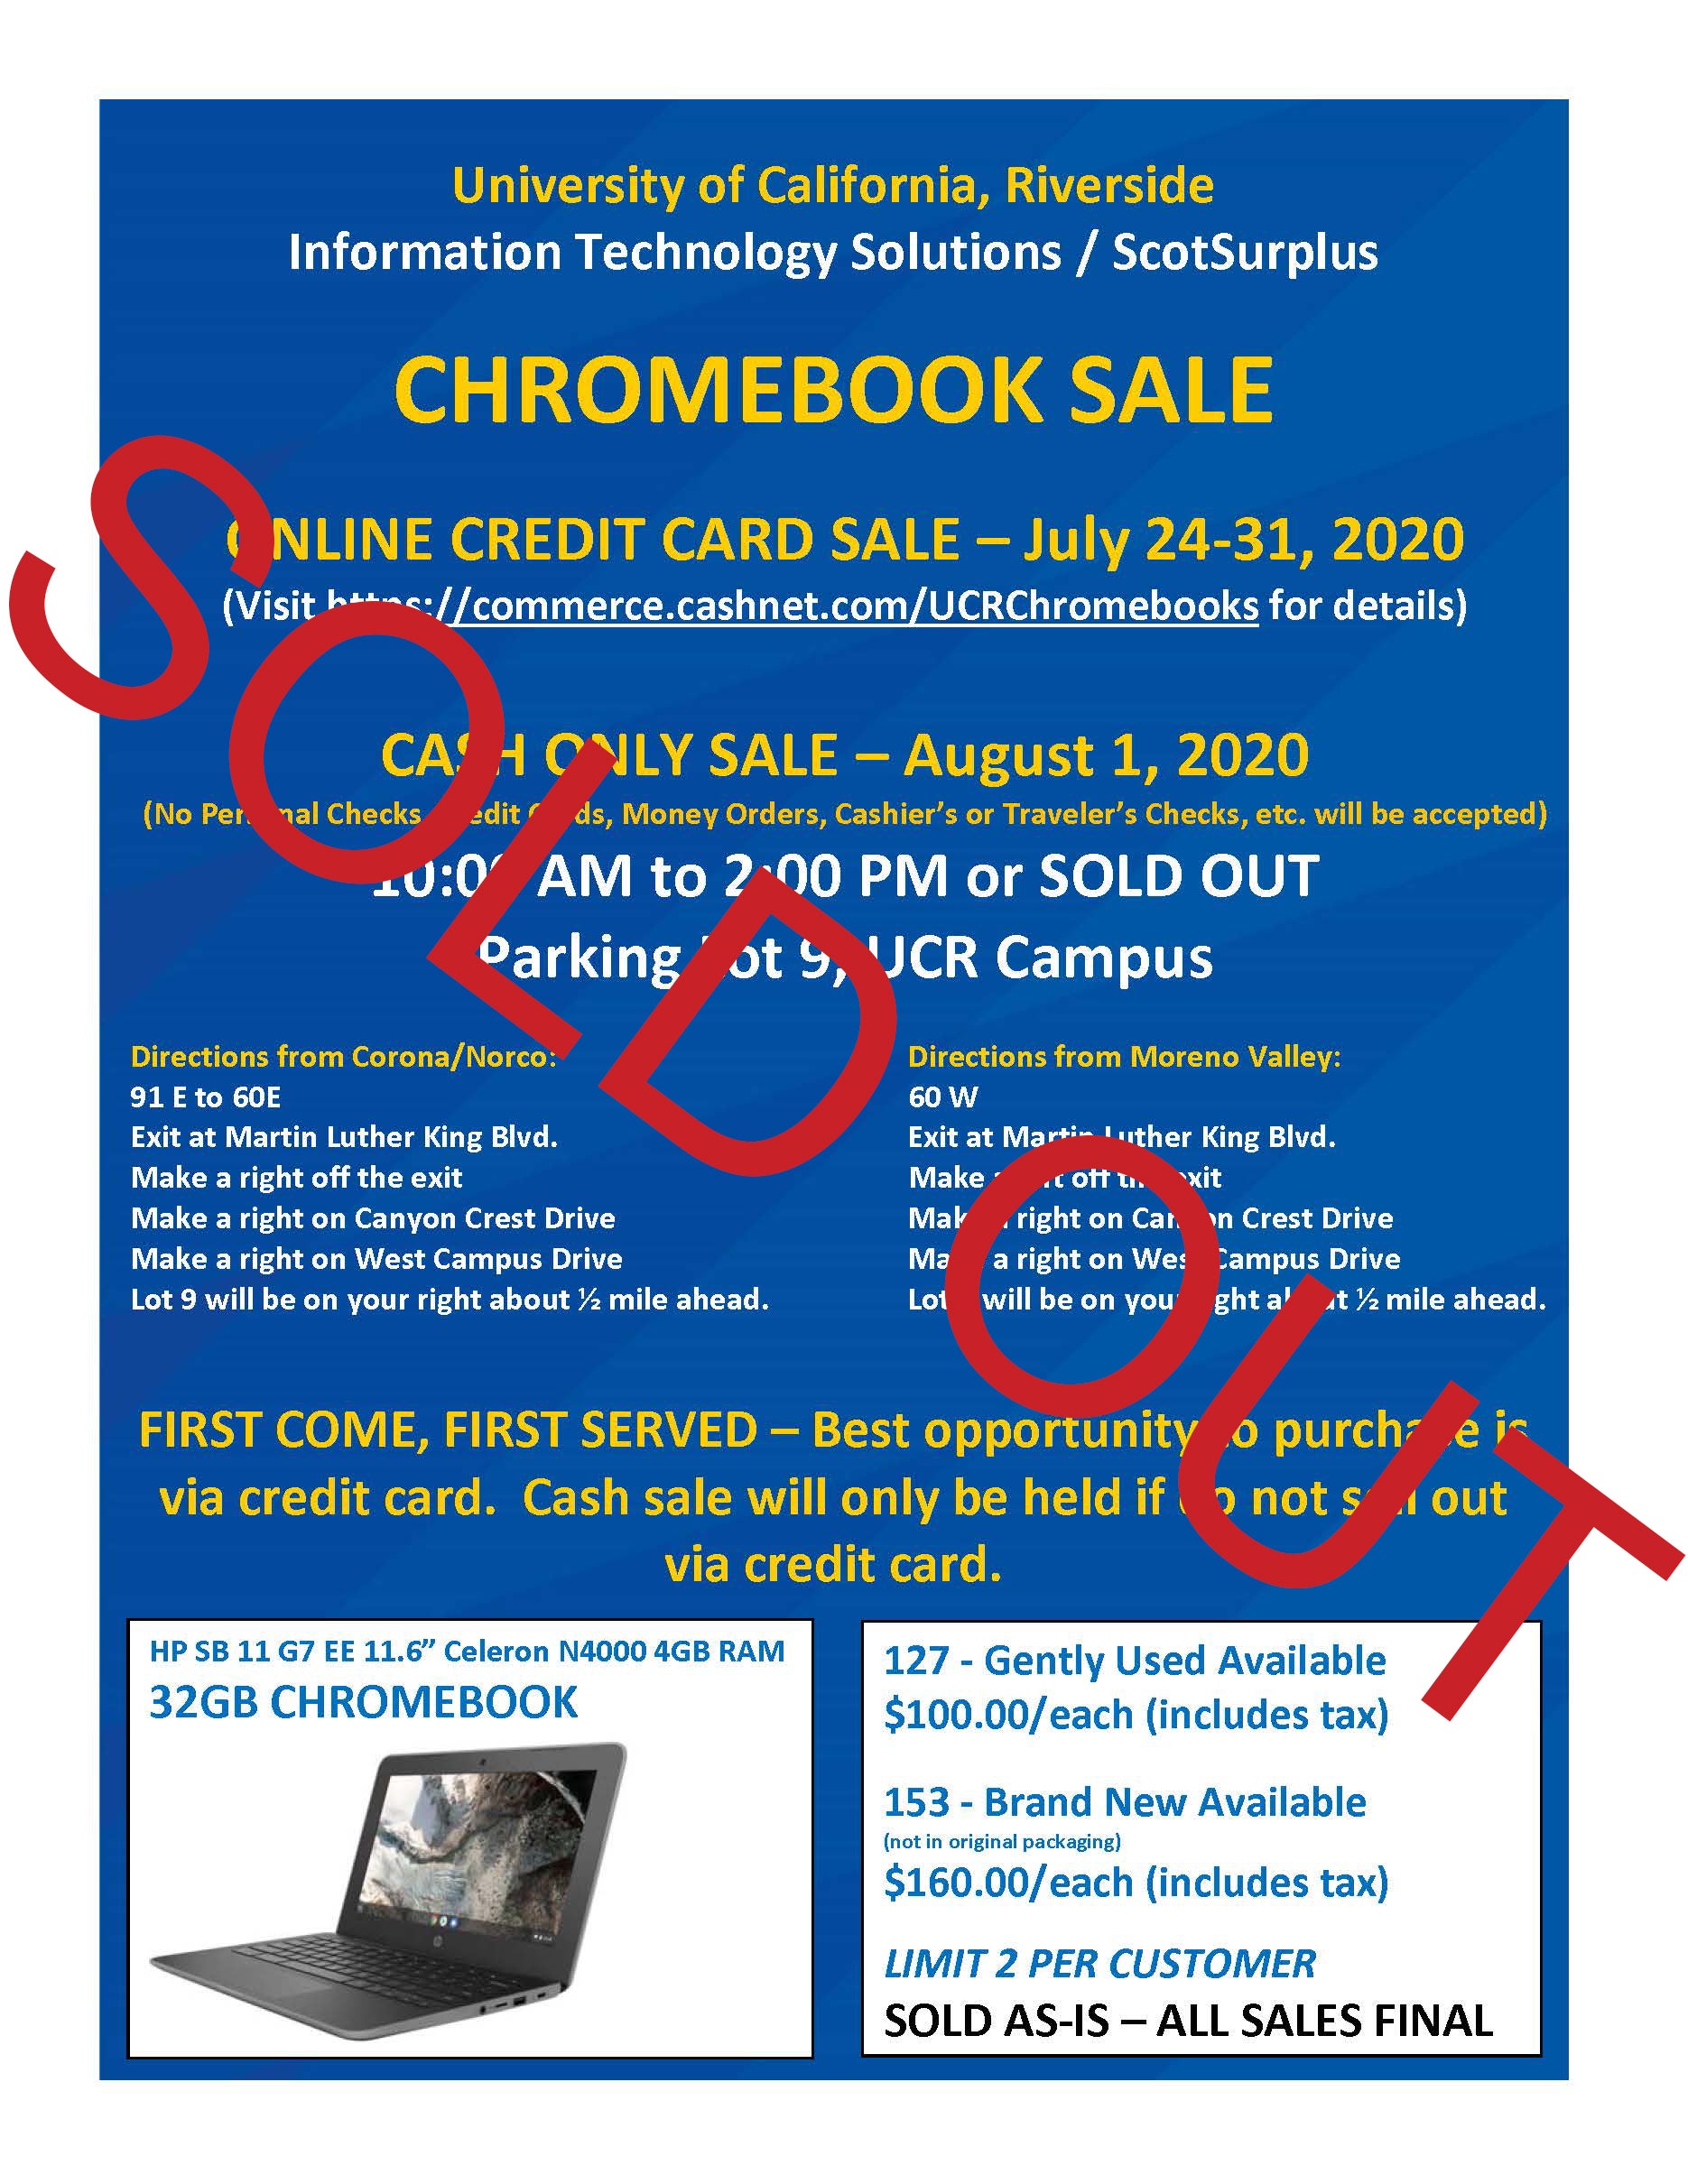 Chromebook Sale Flyer 2020 Sold Out